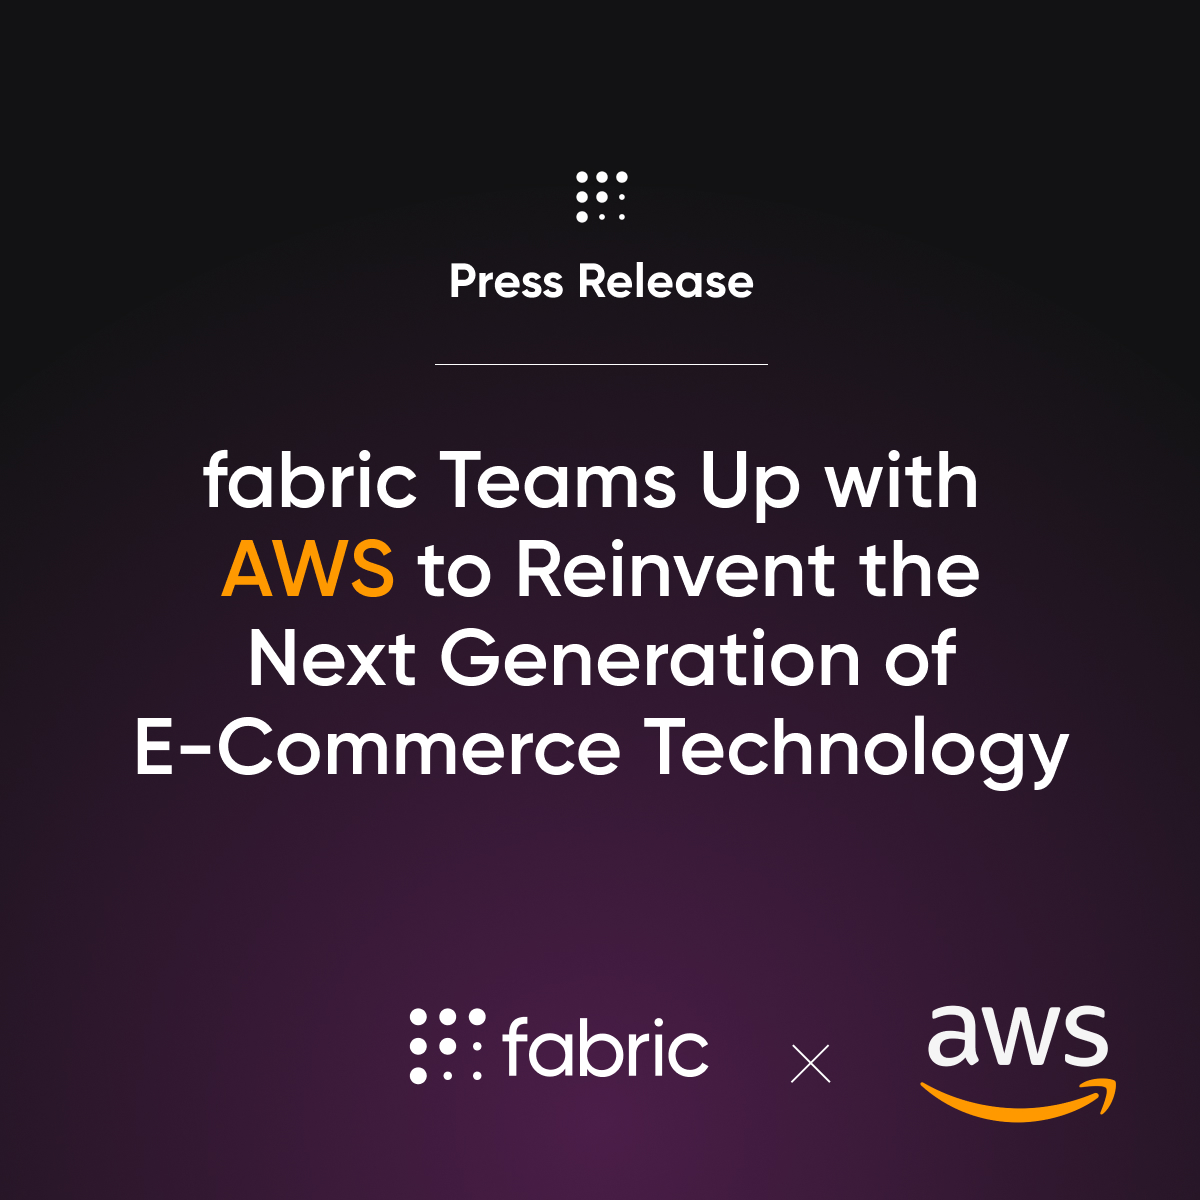 It’s an awesome day for #teamfabric! Announcing that fabric is now part of the @awscloud Partner Network and Marketplace. This partnership will allow fabric to offer our innovative #ecommerce solutions to more customers. ☁️#AWS Learn more 🔗: tinyurl.com/5andmztp